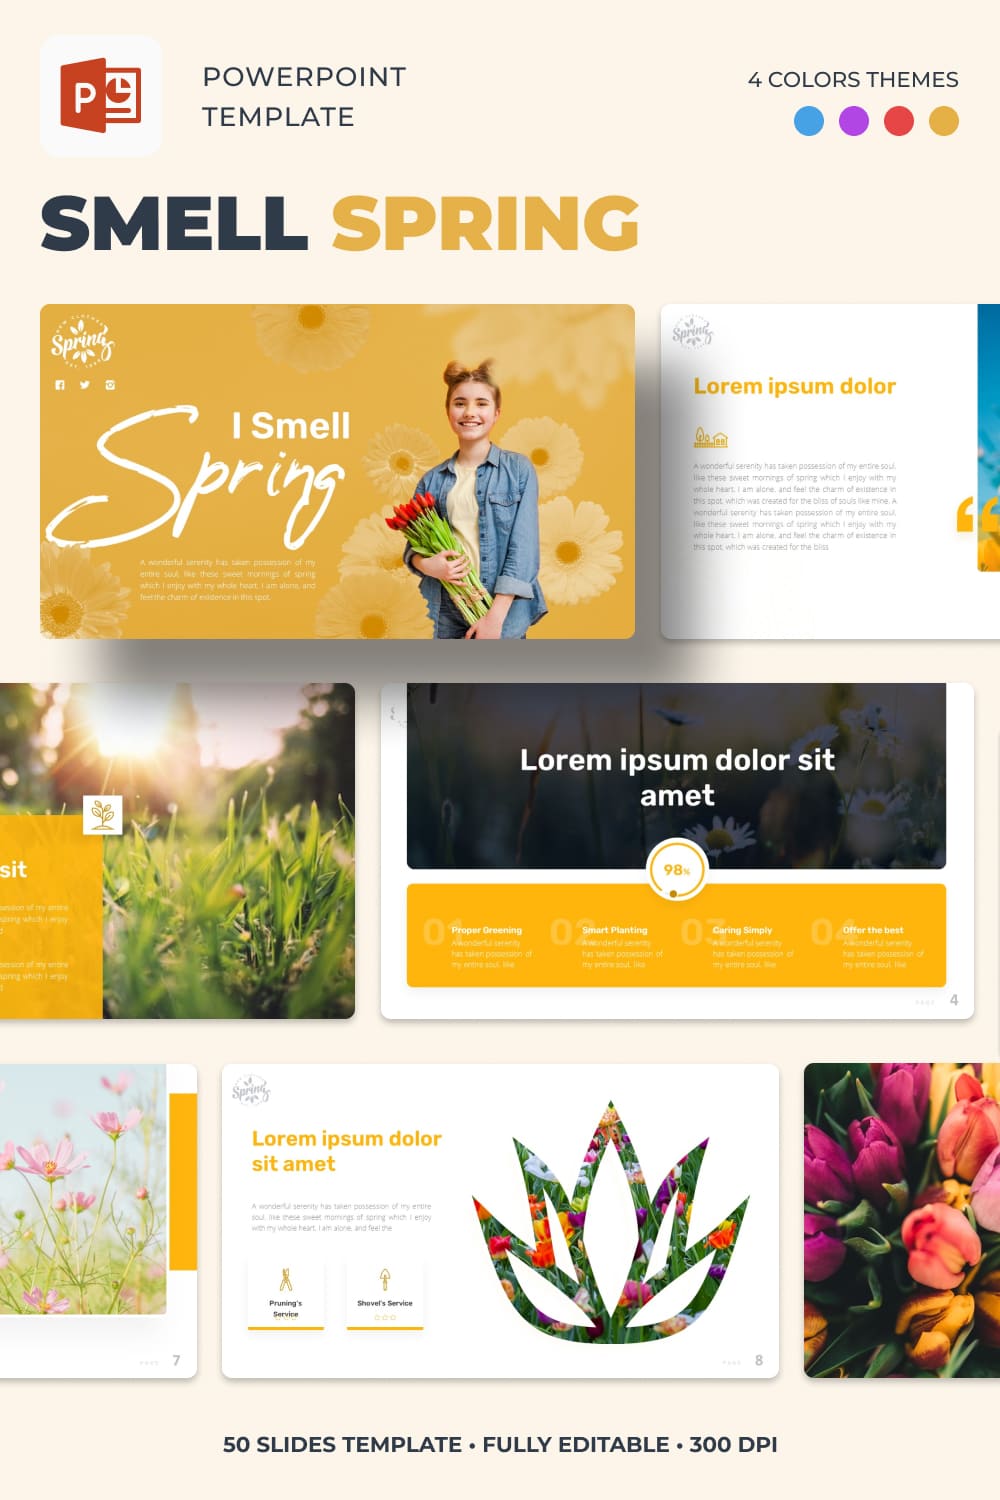 A pack of images of gorgeous presentation slides on the theme of spring.